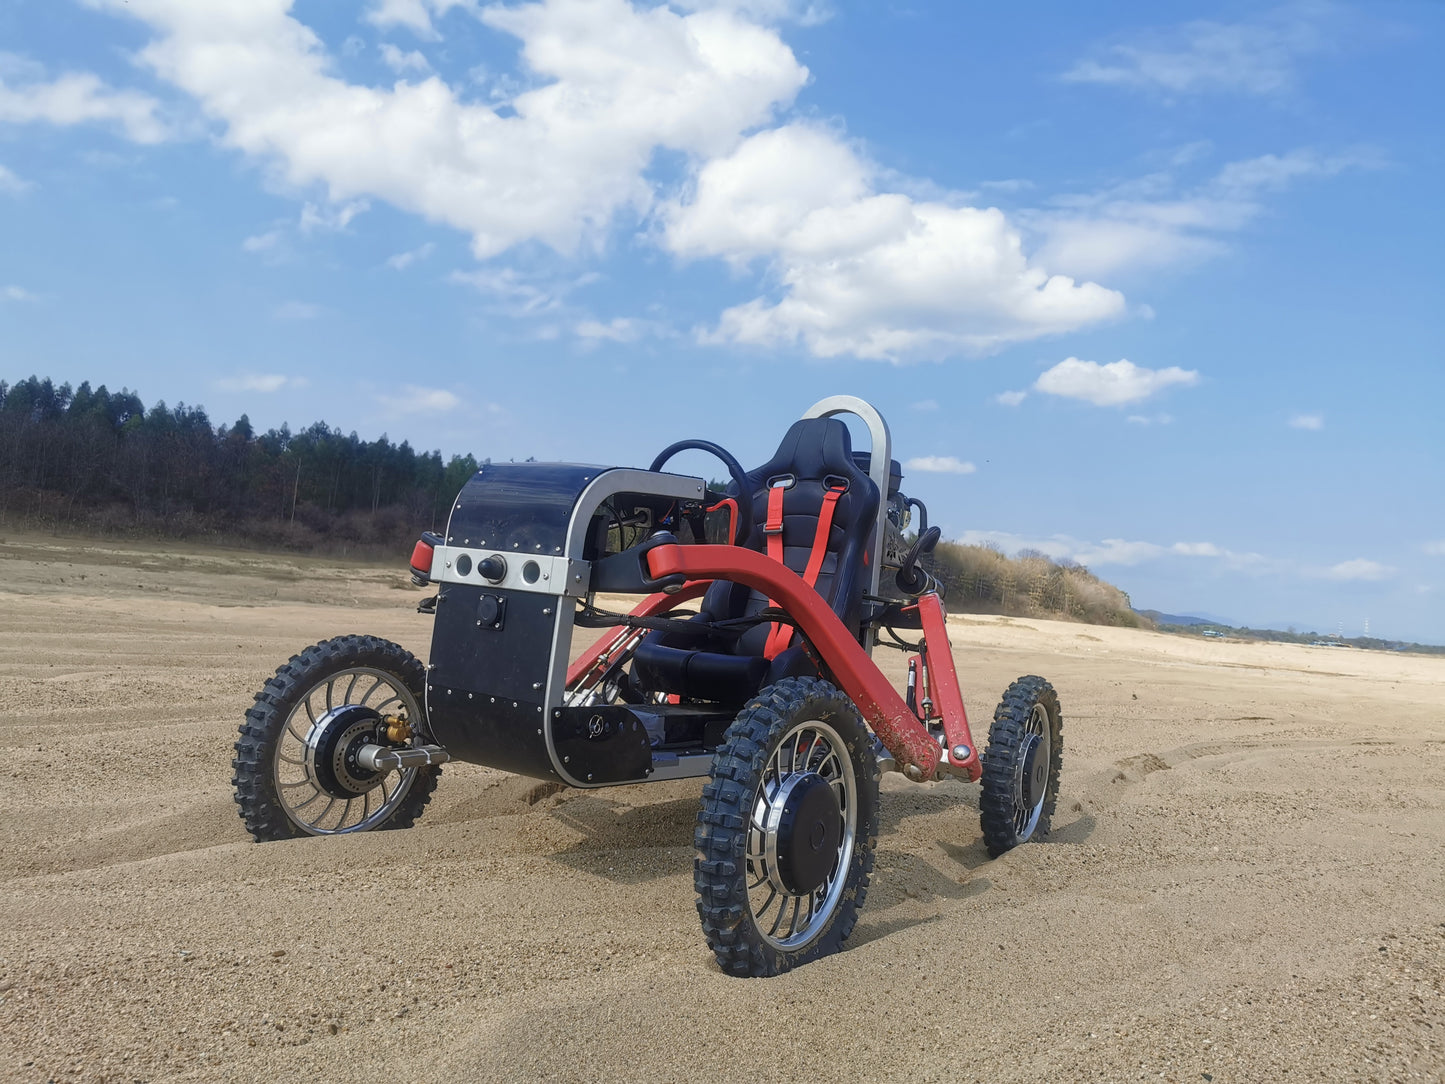 All-terrain electric off-road spider vehicle